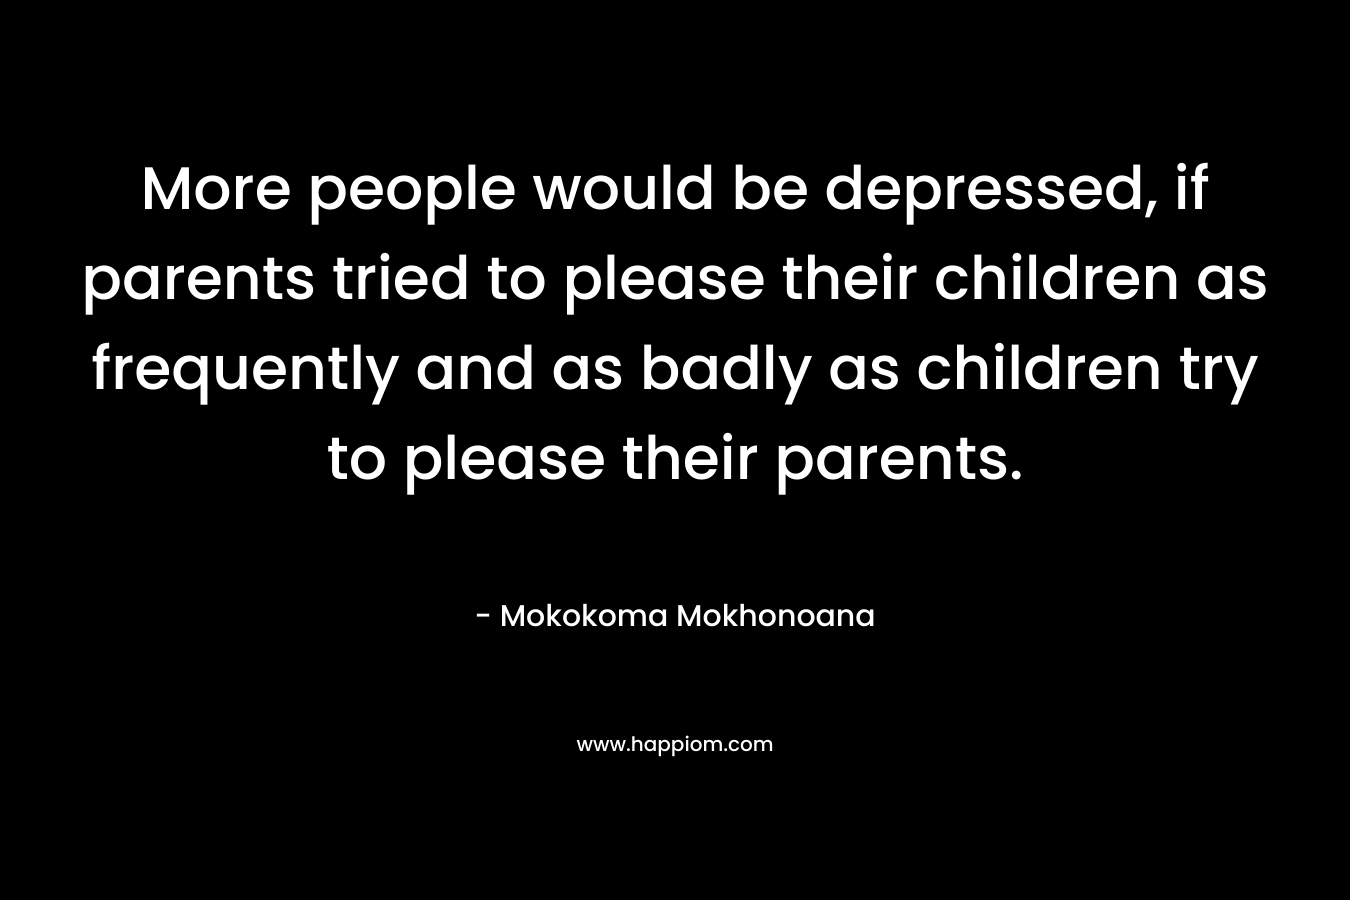 More people would be depressed, if parents tried to please their children as frequently and as badly as children try to please their parents.